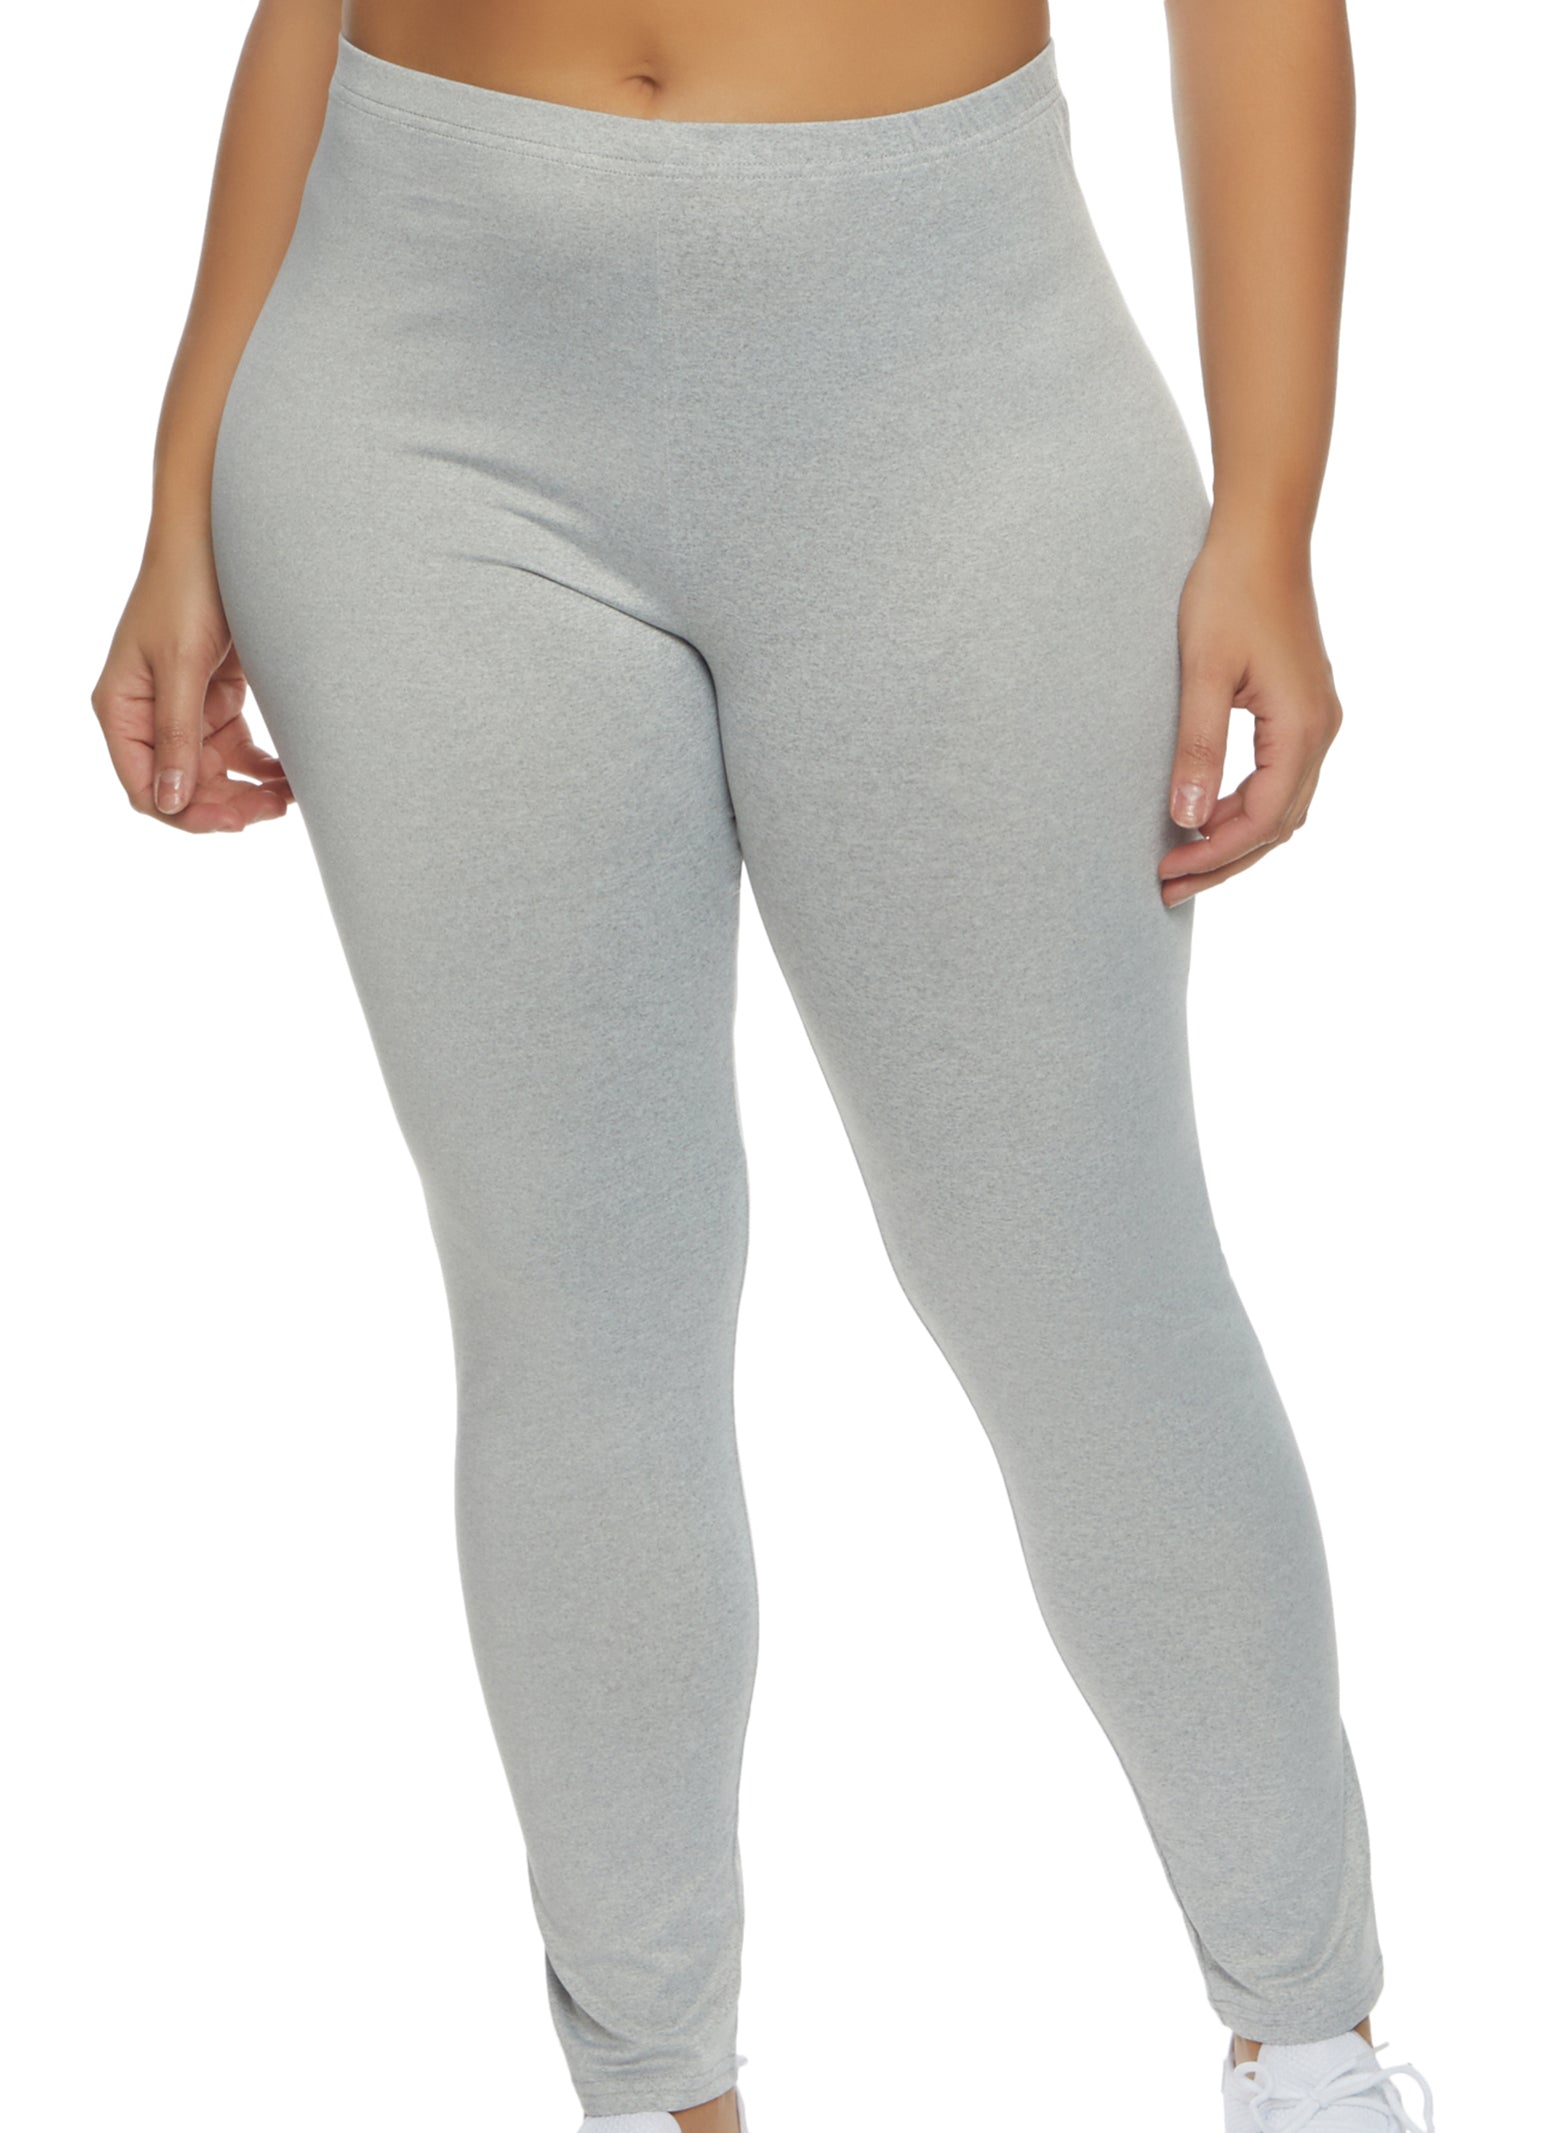 Plus Size Solid Soft Knit Leggings - Heather